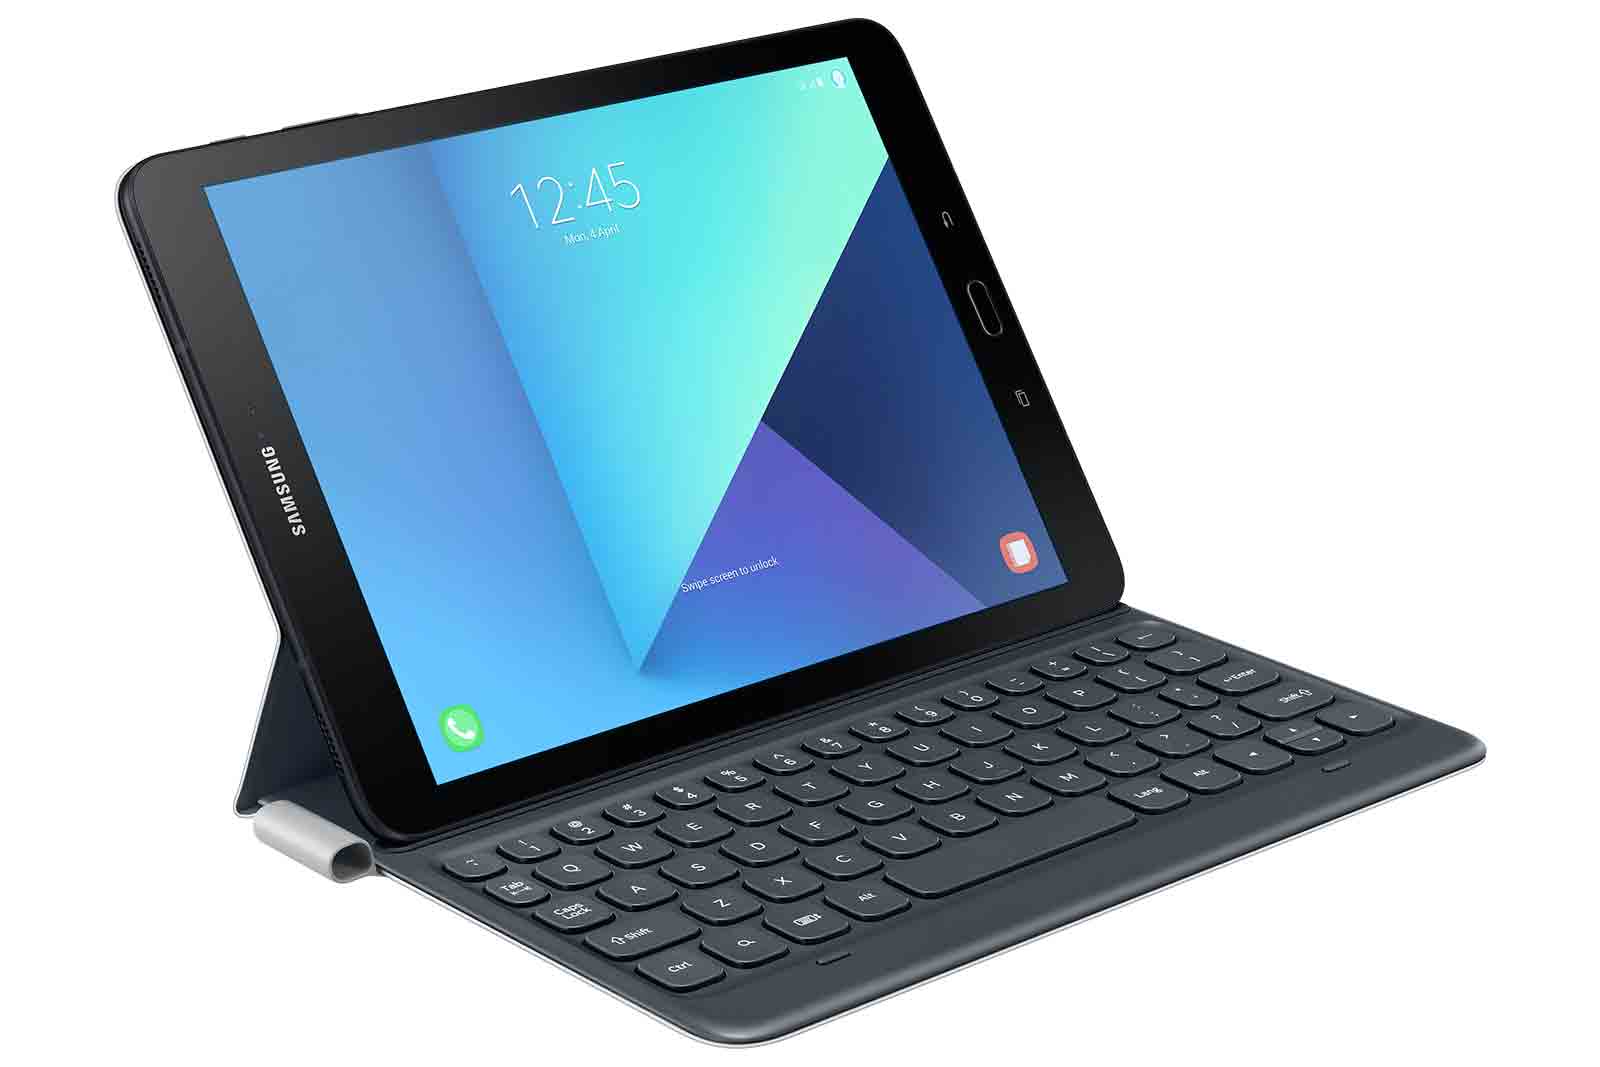 supermarkt Rauw Diploma Galaxy Tab S3 9.7" Keyboard Cover Mobile Accessories - EJ-FT820USEGUJ |  Samsung US